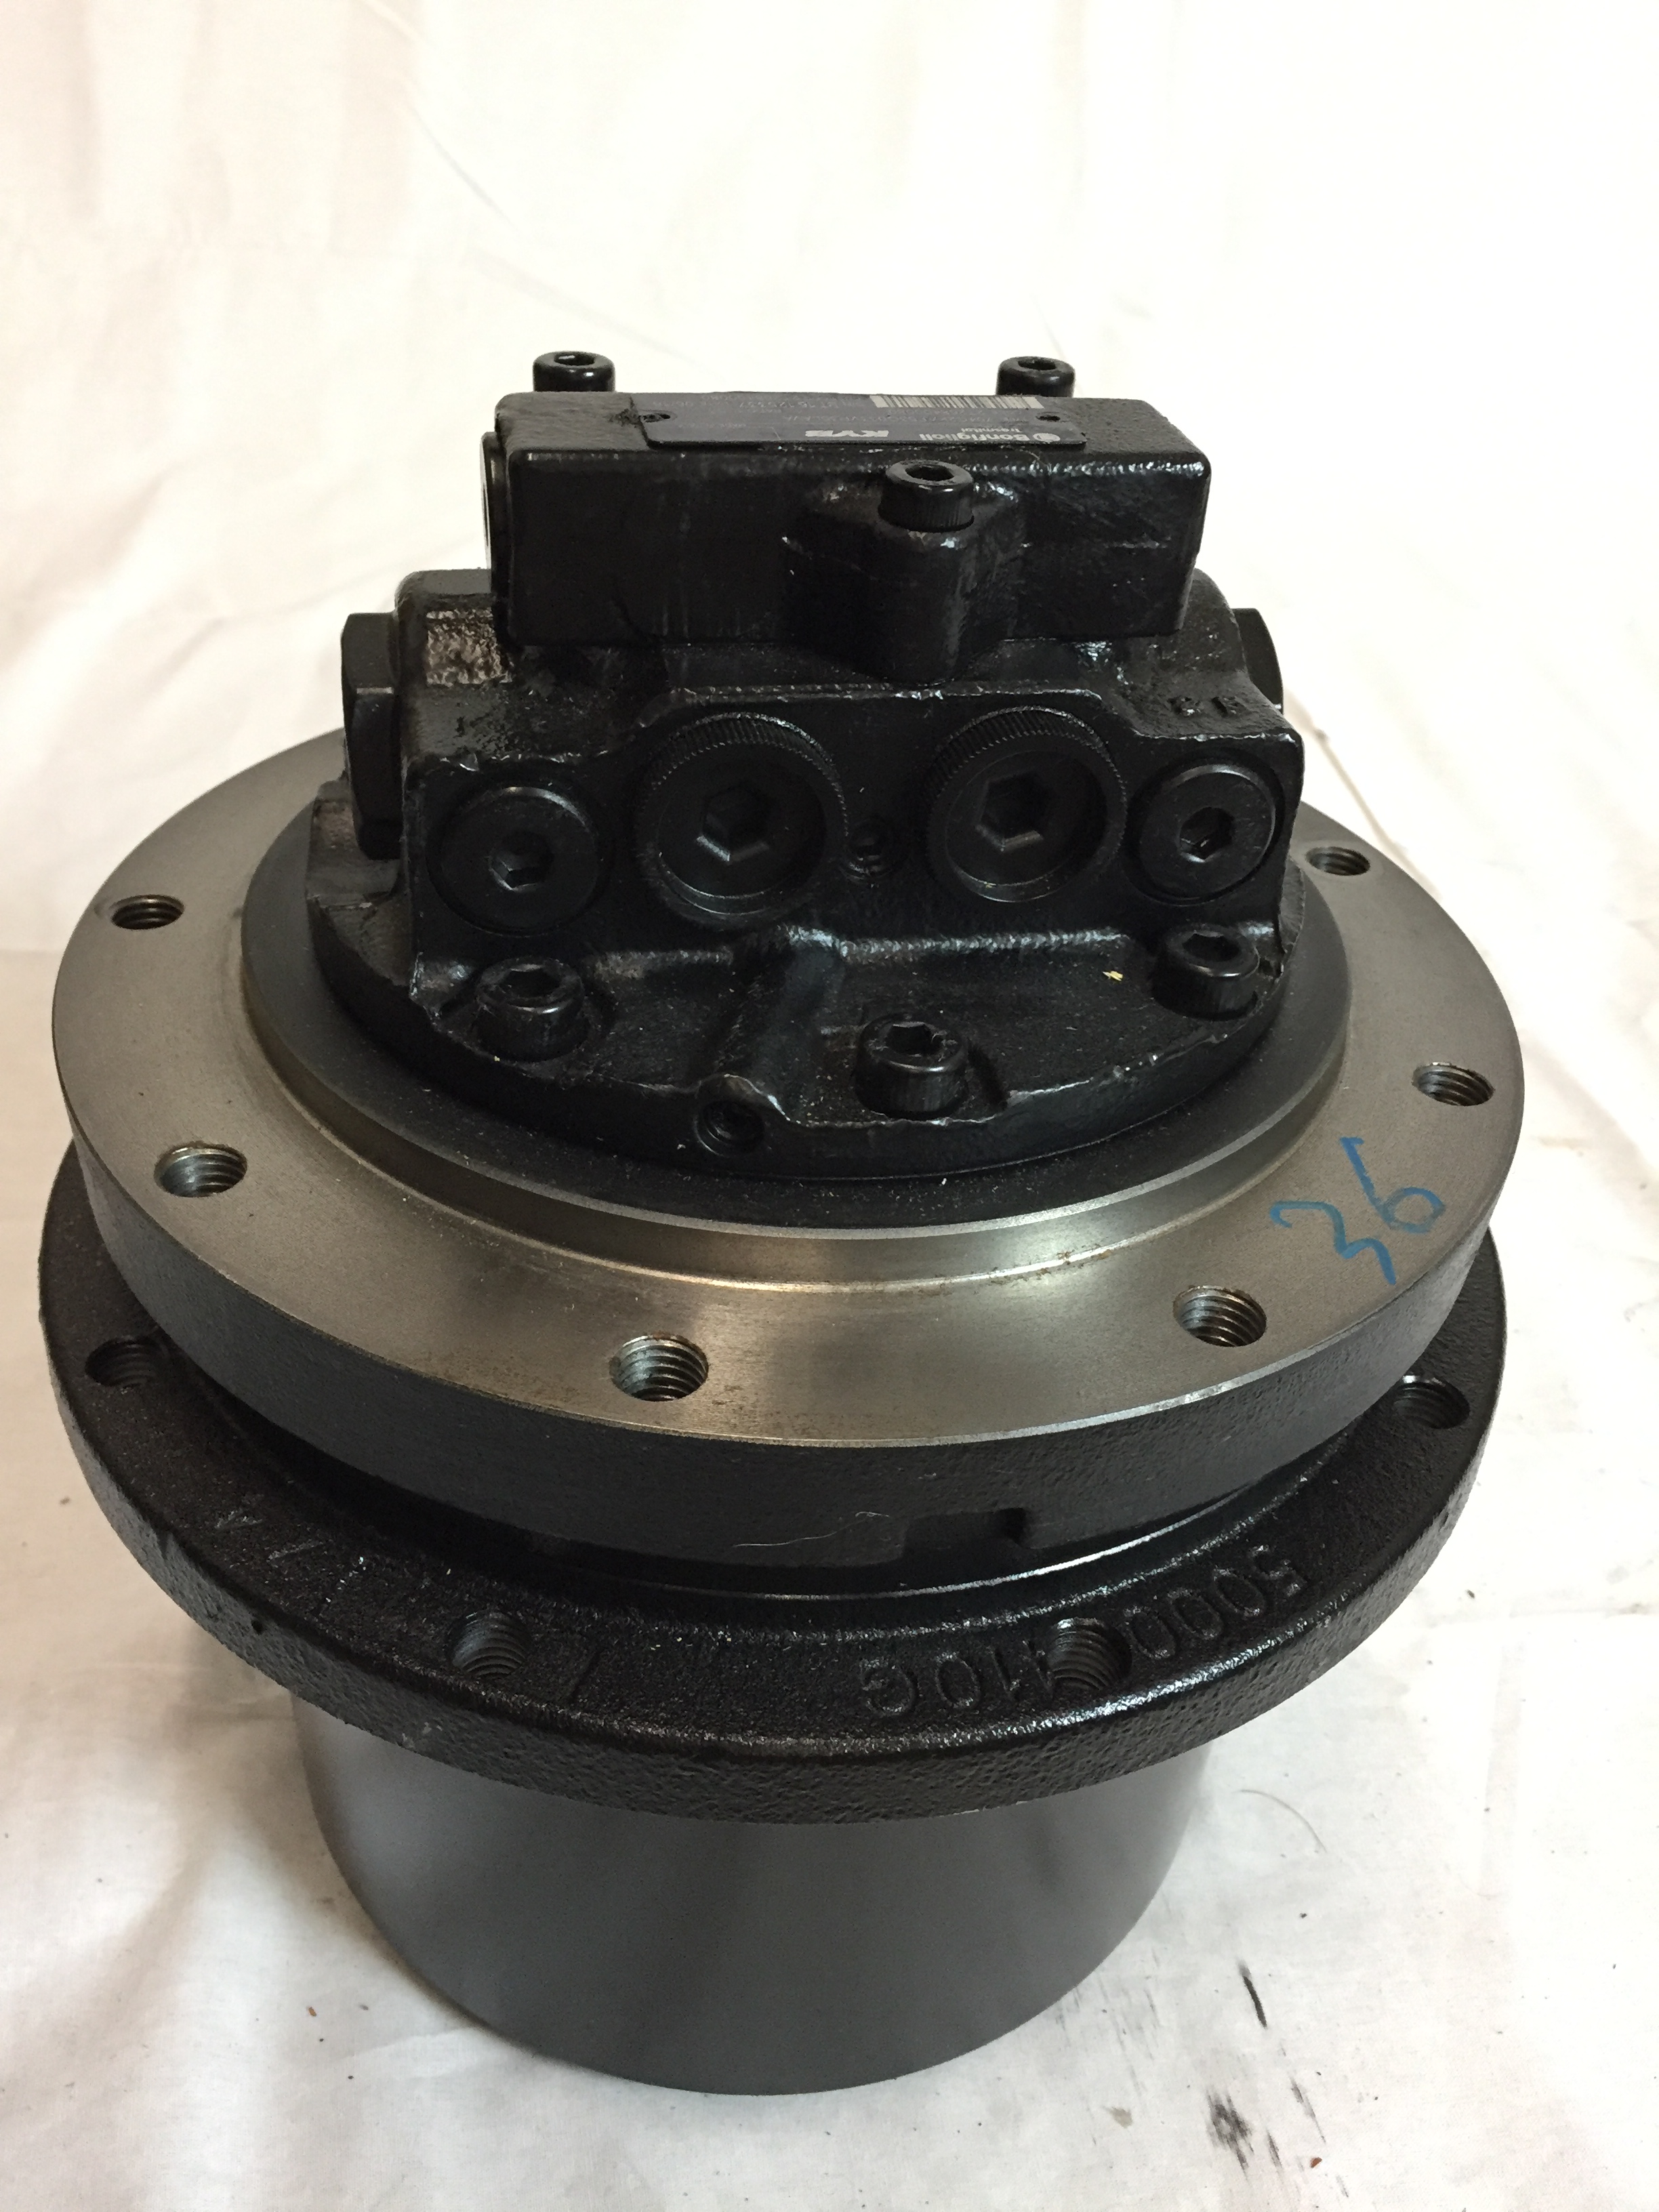 EX40U-2 Complete Final Drive (Planetary/Travel Drive) with Motor (LOW S/N 244001-274999) Part #4628892,0922101